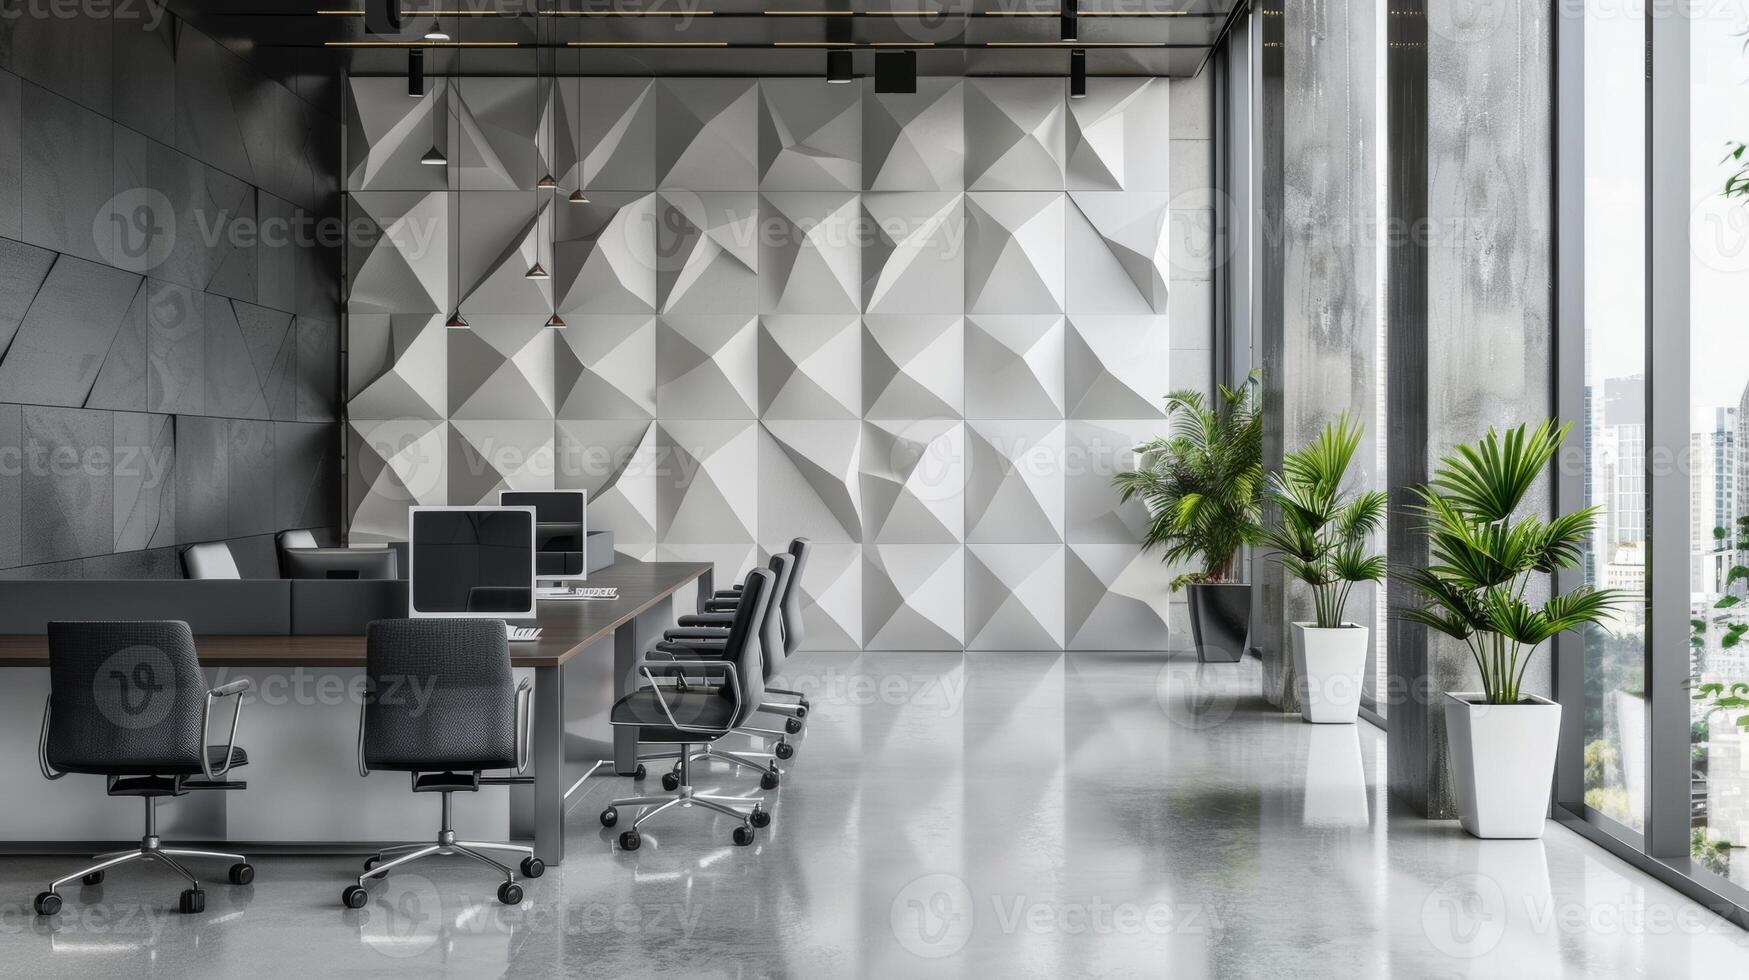 A monochromatic geometric ceramic wall installation adding texture and depth to a sleek office space. photo